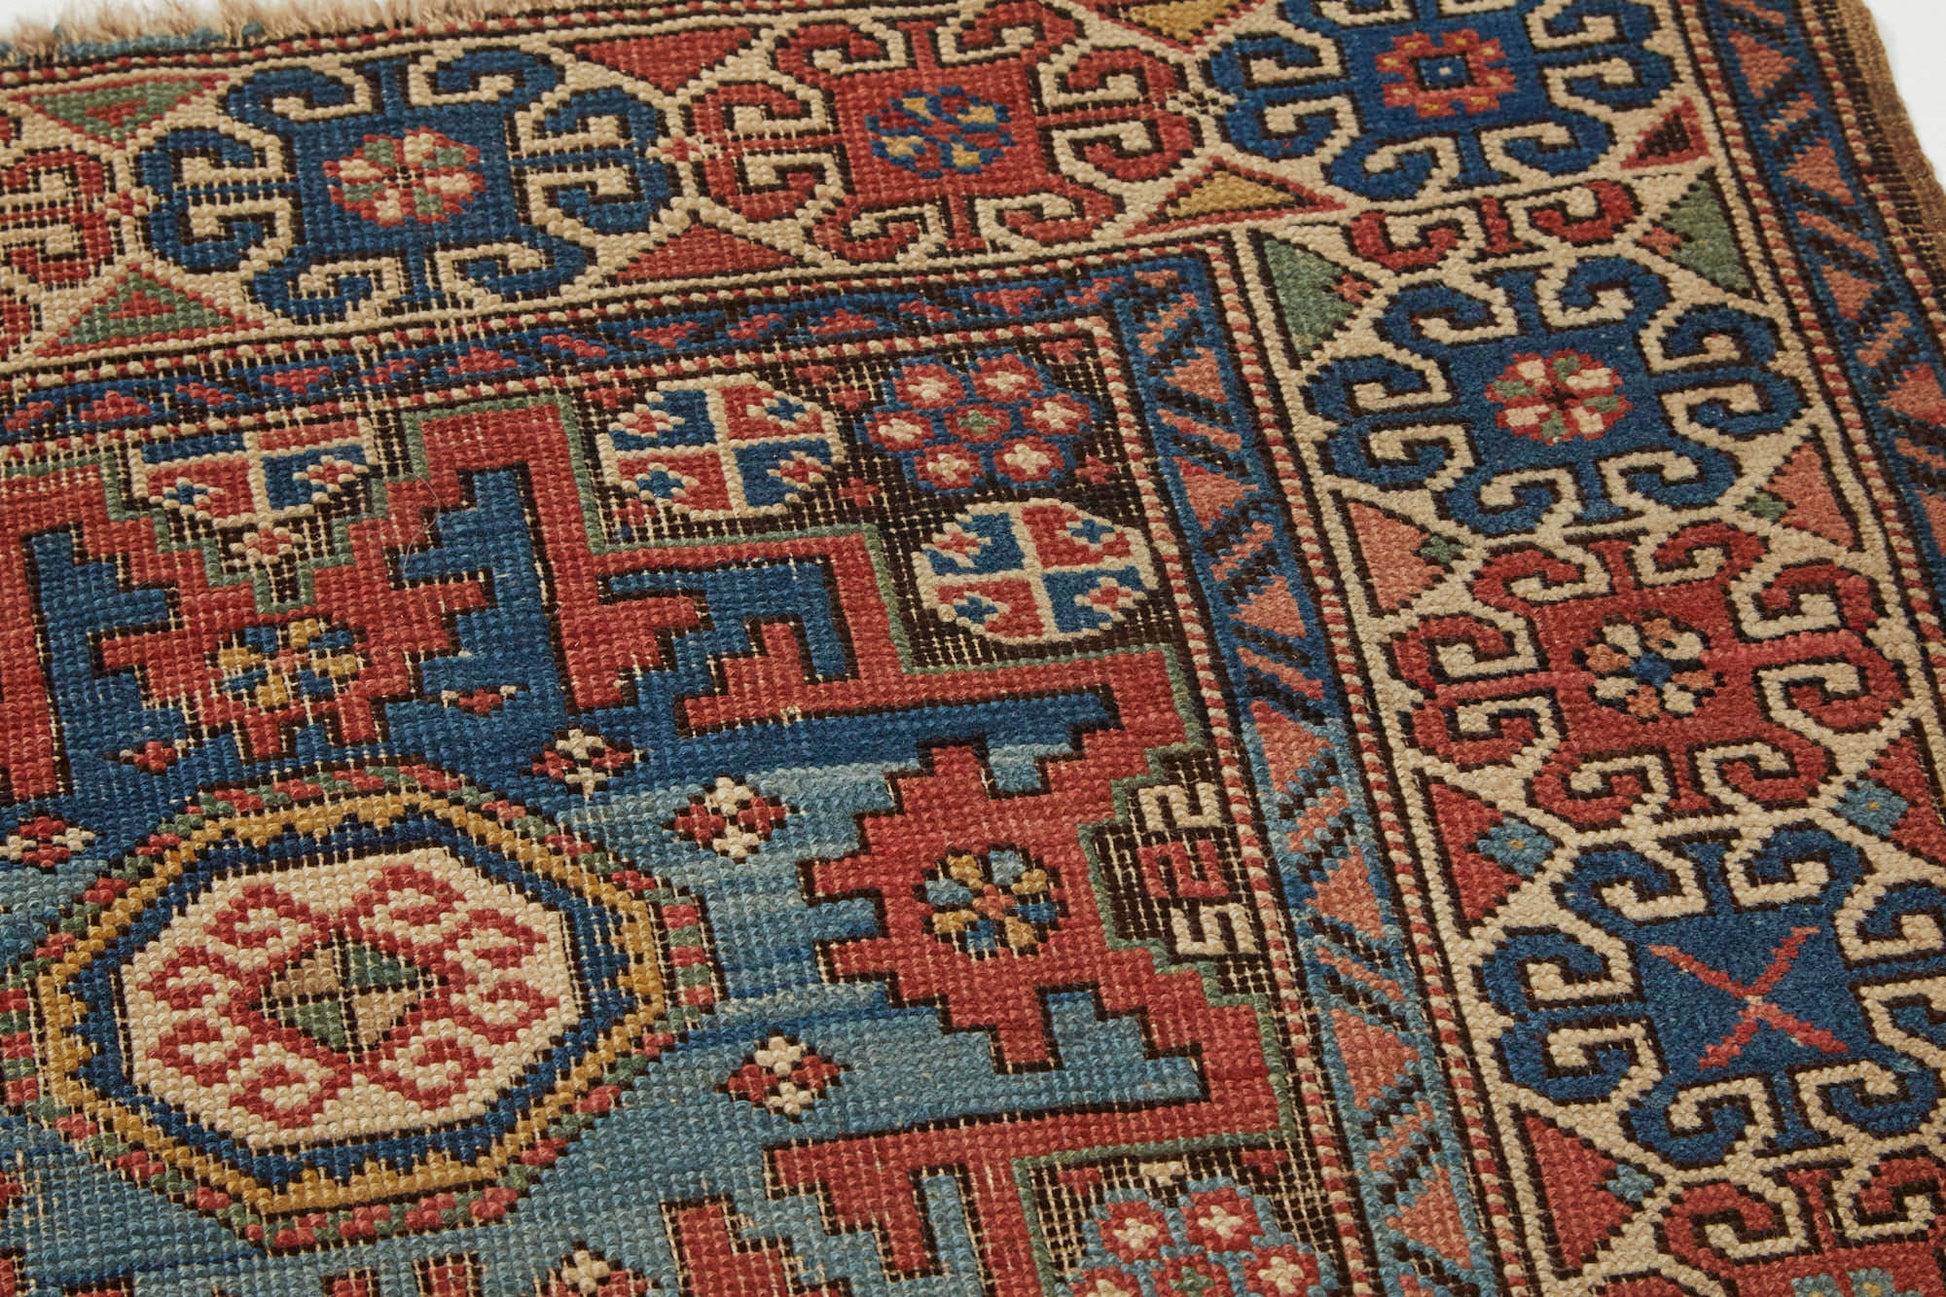 Antique hand woven Lesghi star Persian Rug - intricately woven with blue, red, cream and green colors and three large star medallions in the center - Available from King Kennedy Rugs Los Angeles